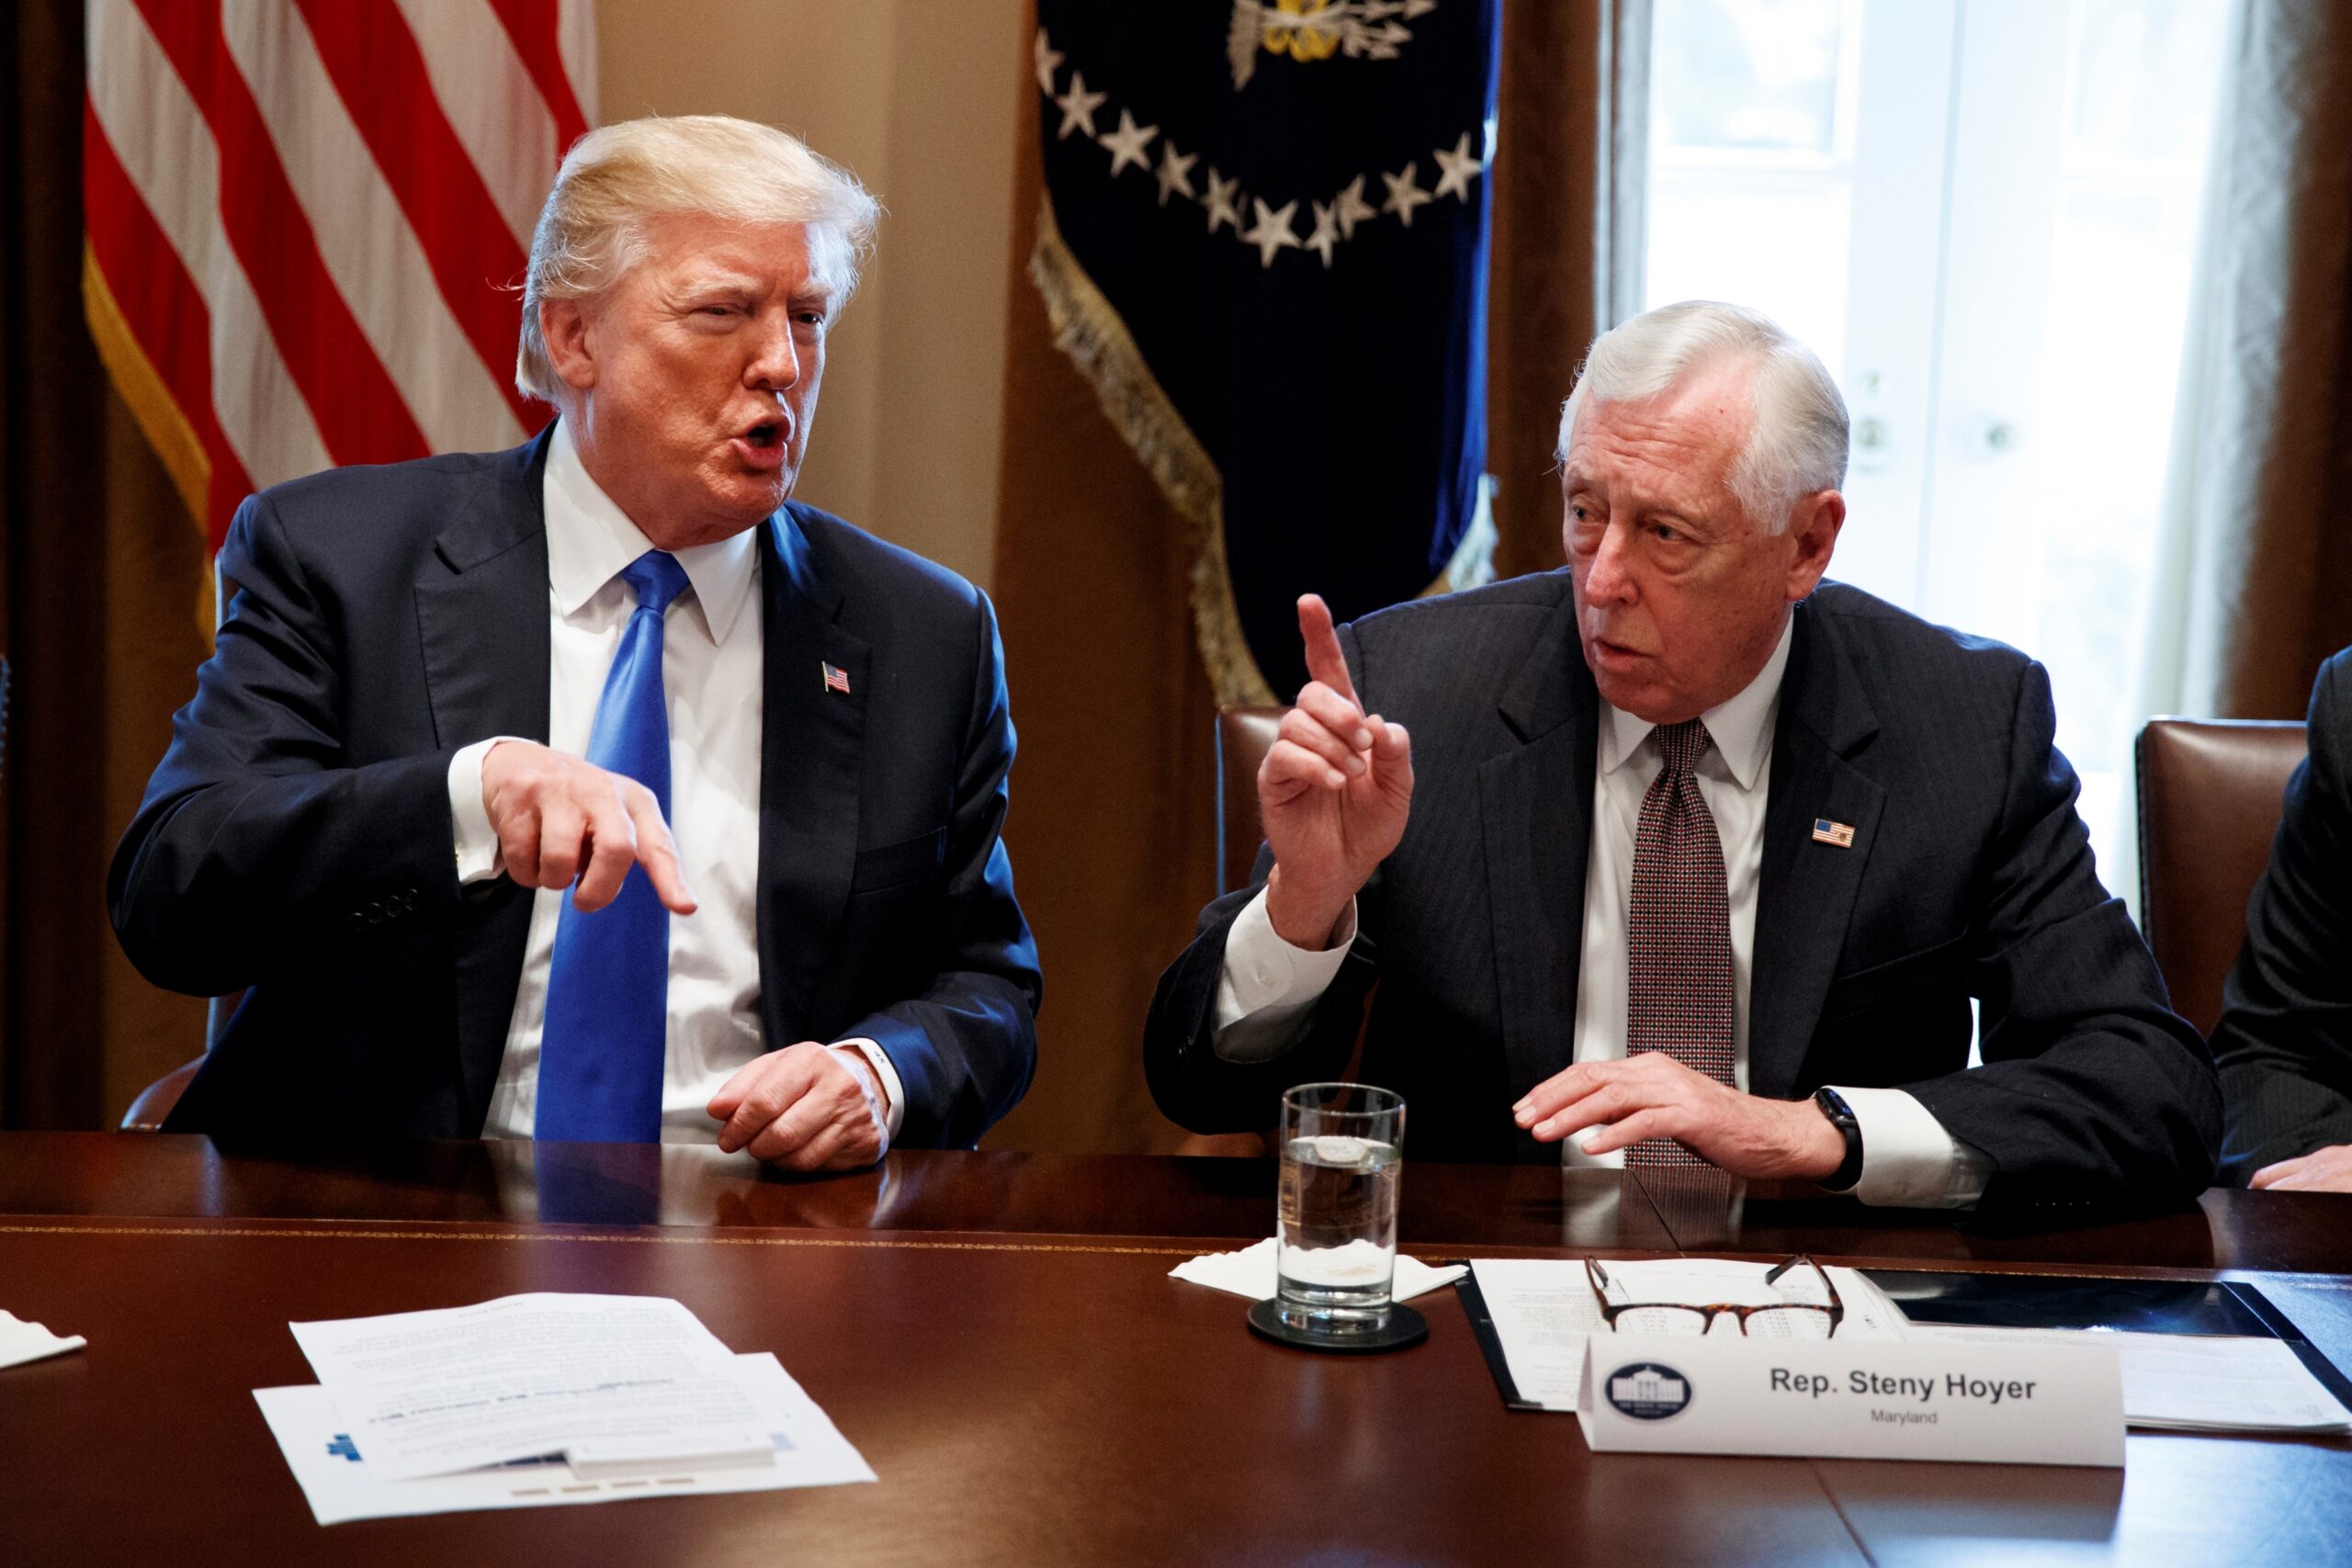 President Donald Trump and Rep. Steny Hoyer